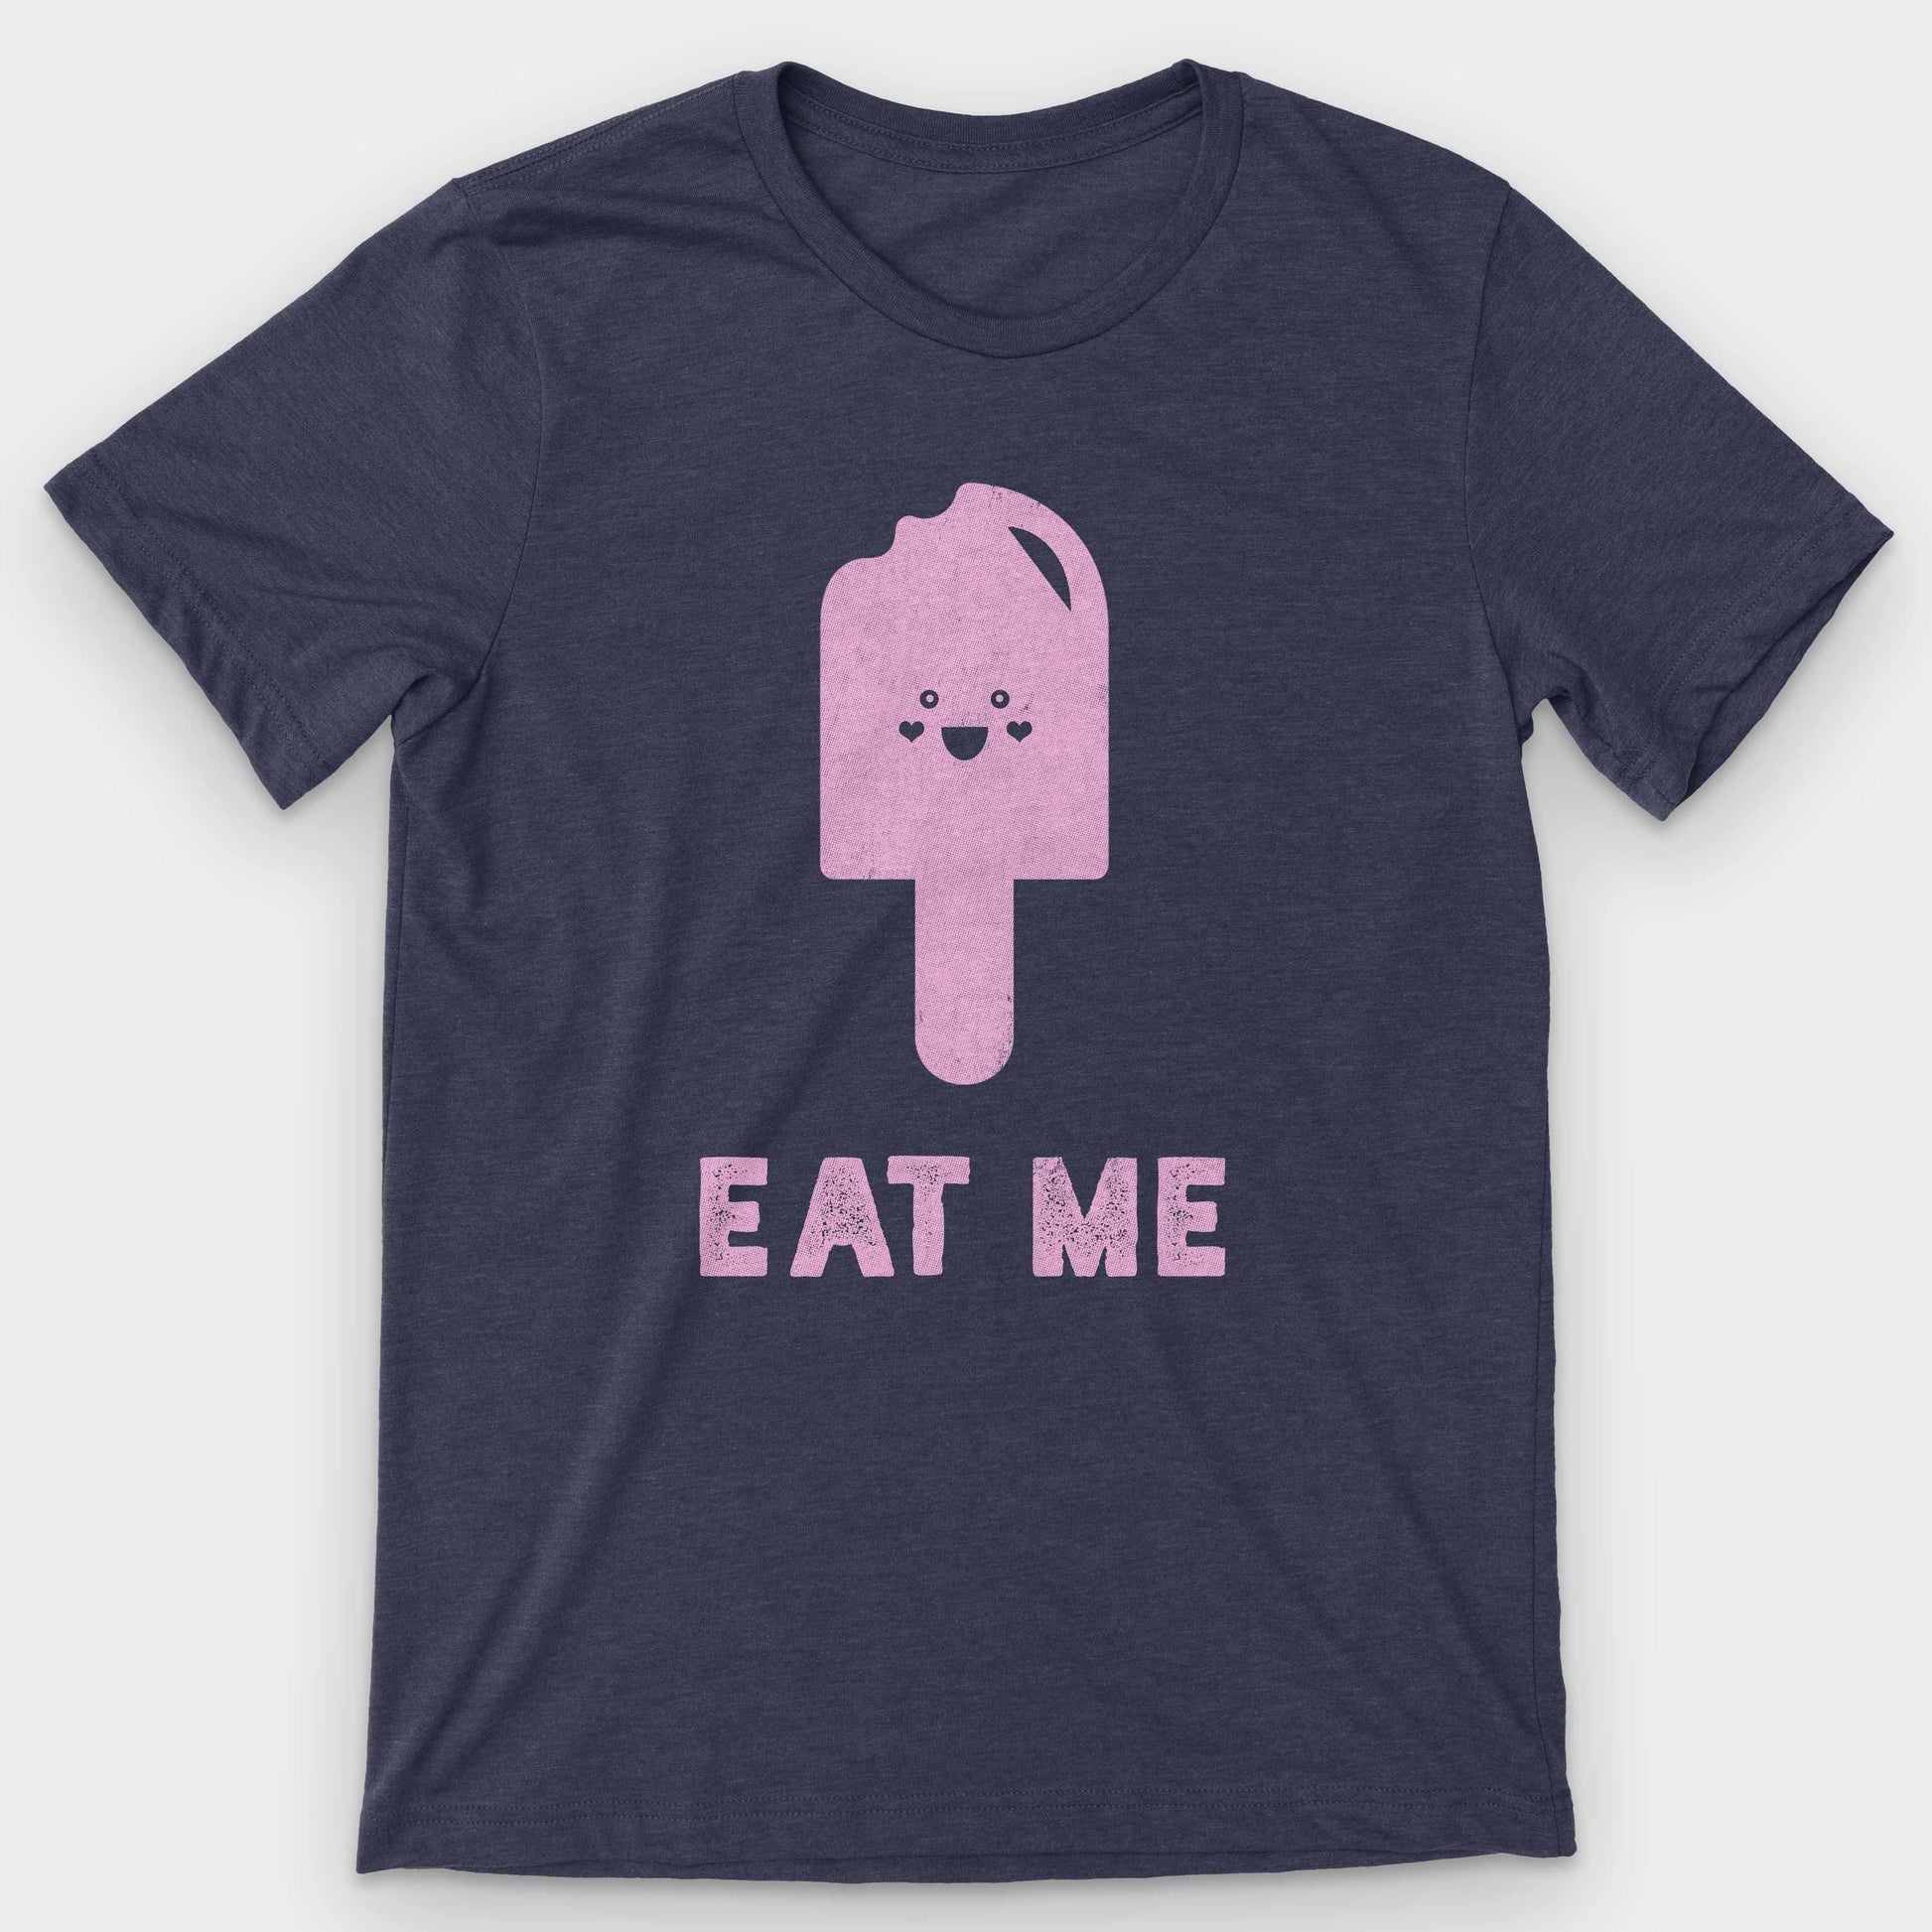 Heather Midnight Navy Eat Me Graphic T-Shirt by Snaxtime